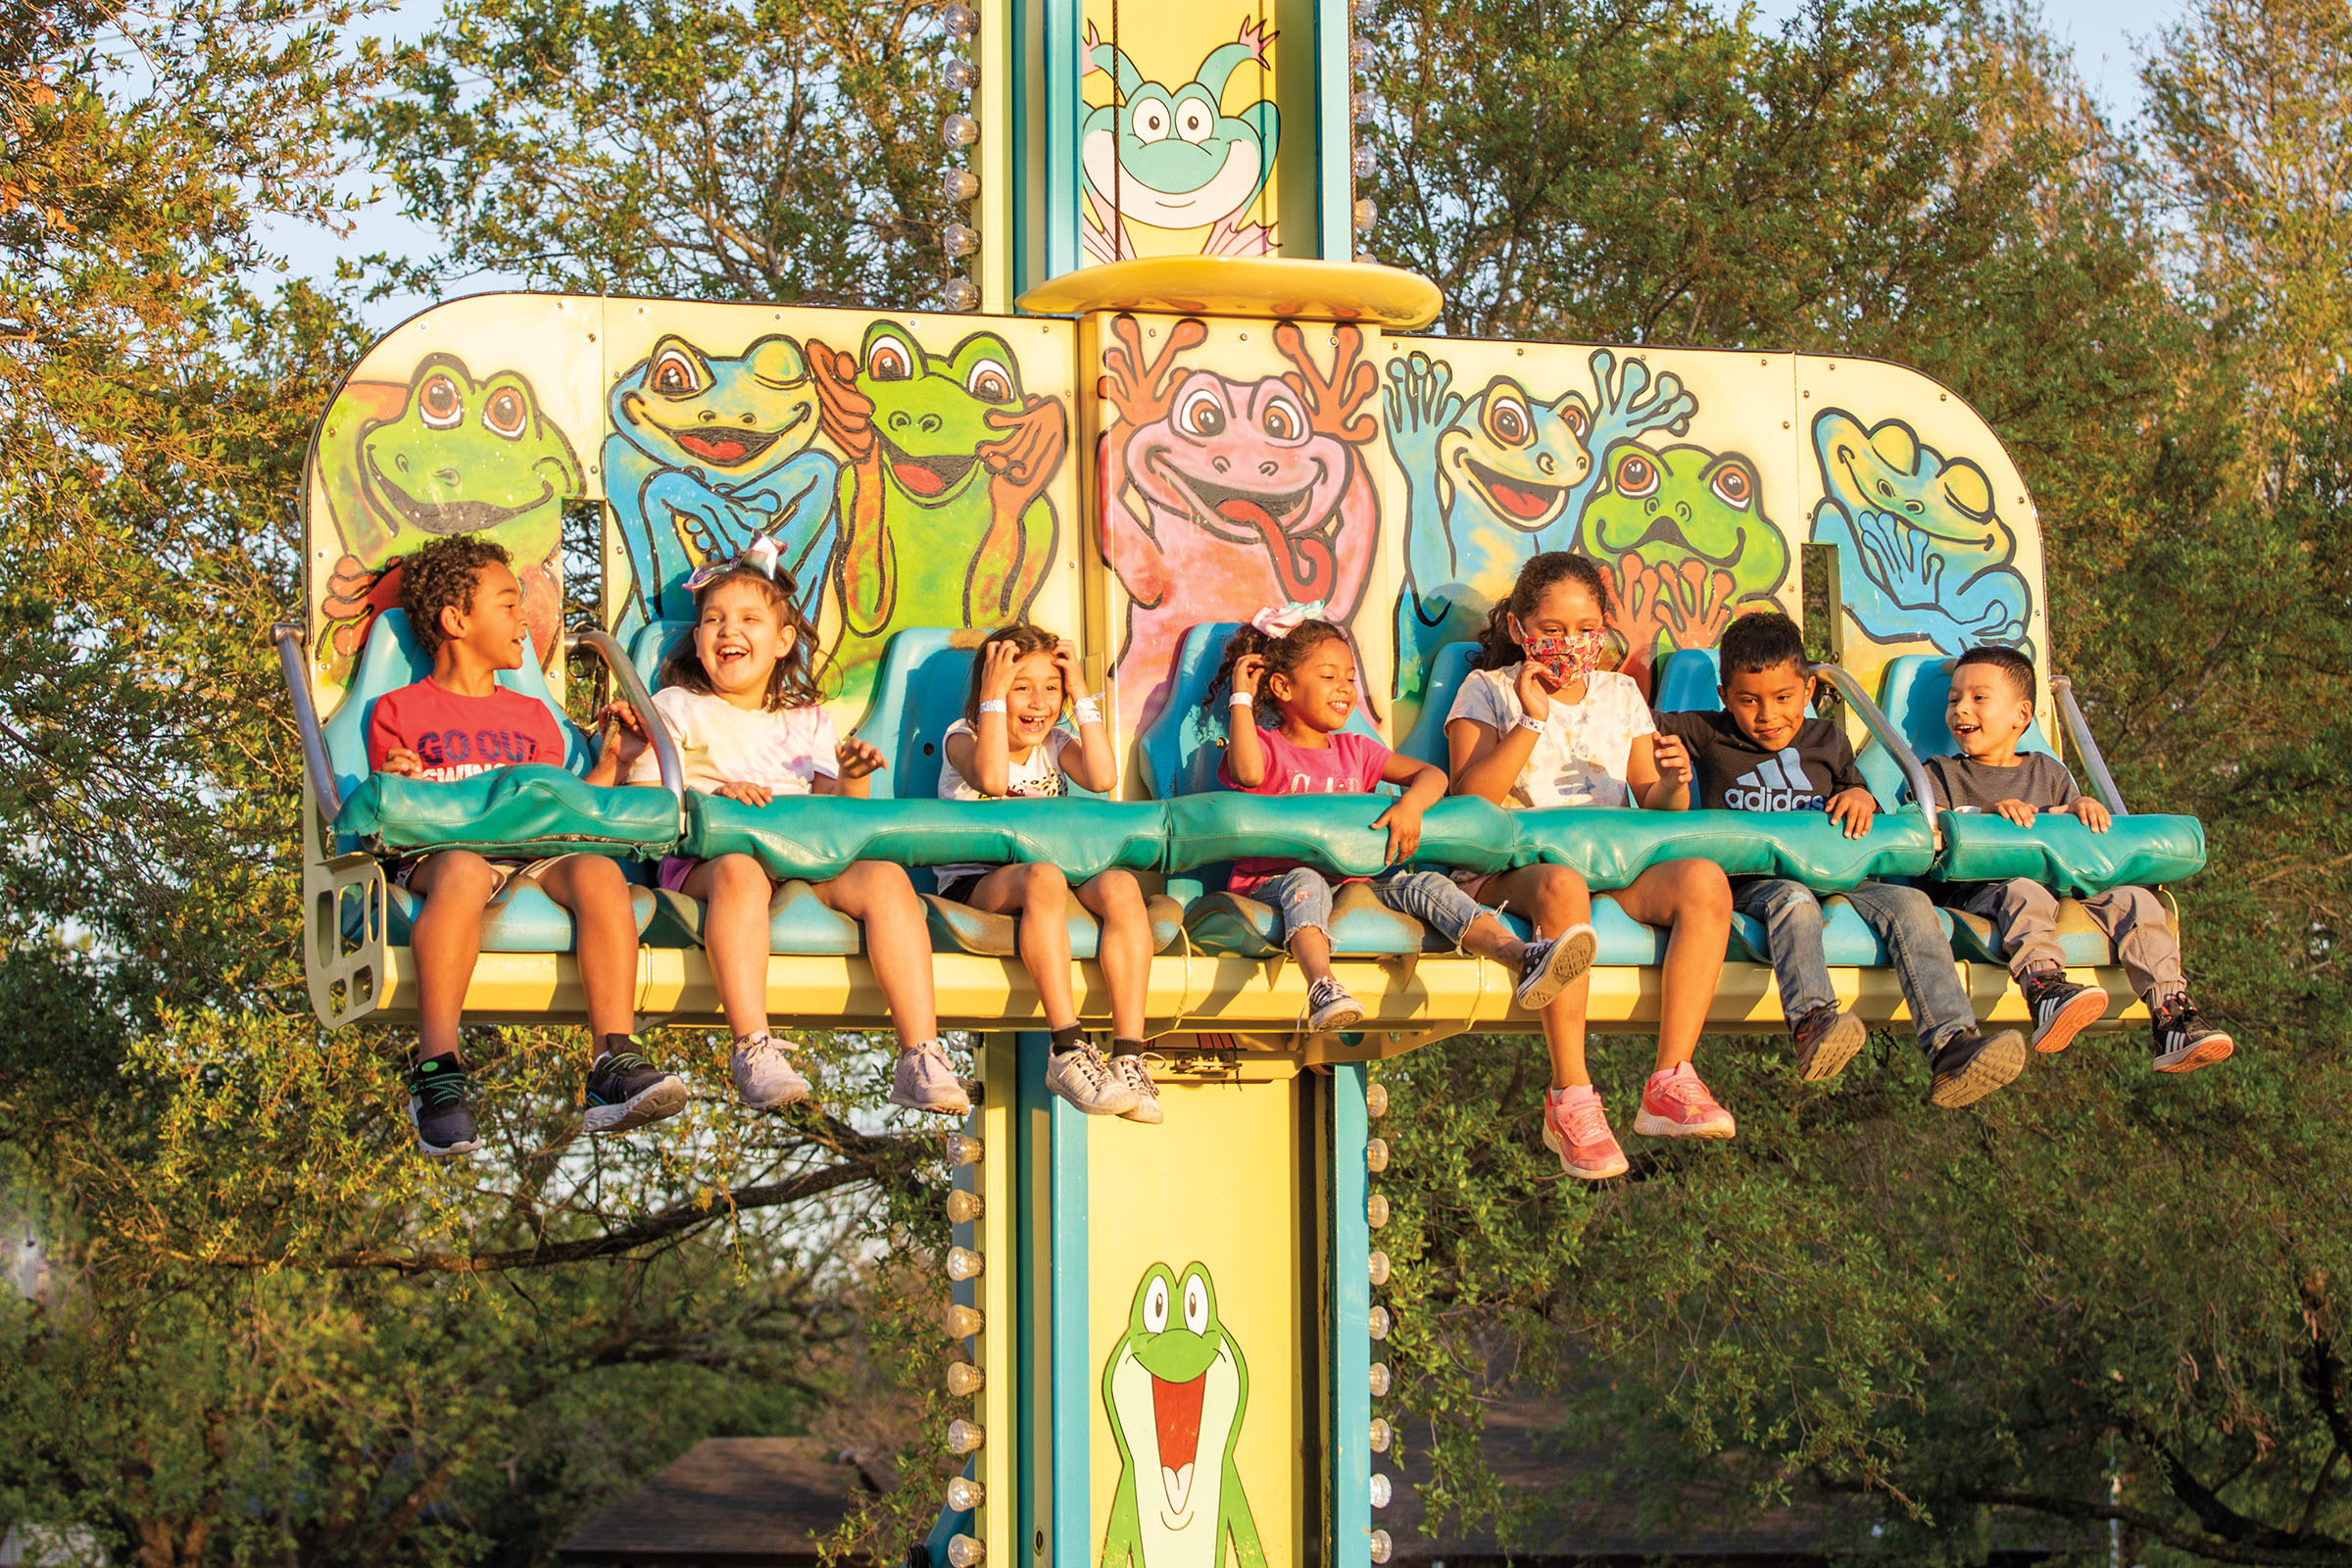 The Mighty Thomas Carnival Brings Joy to Small Town Texas - Texas Highways